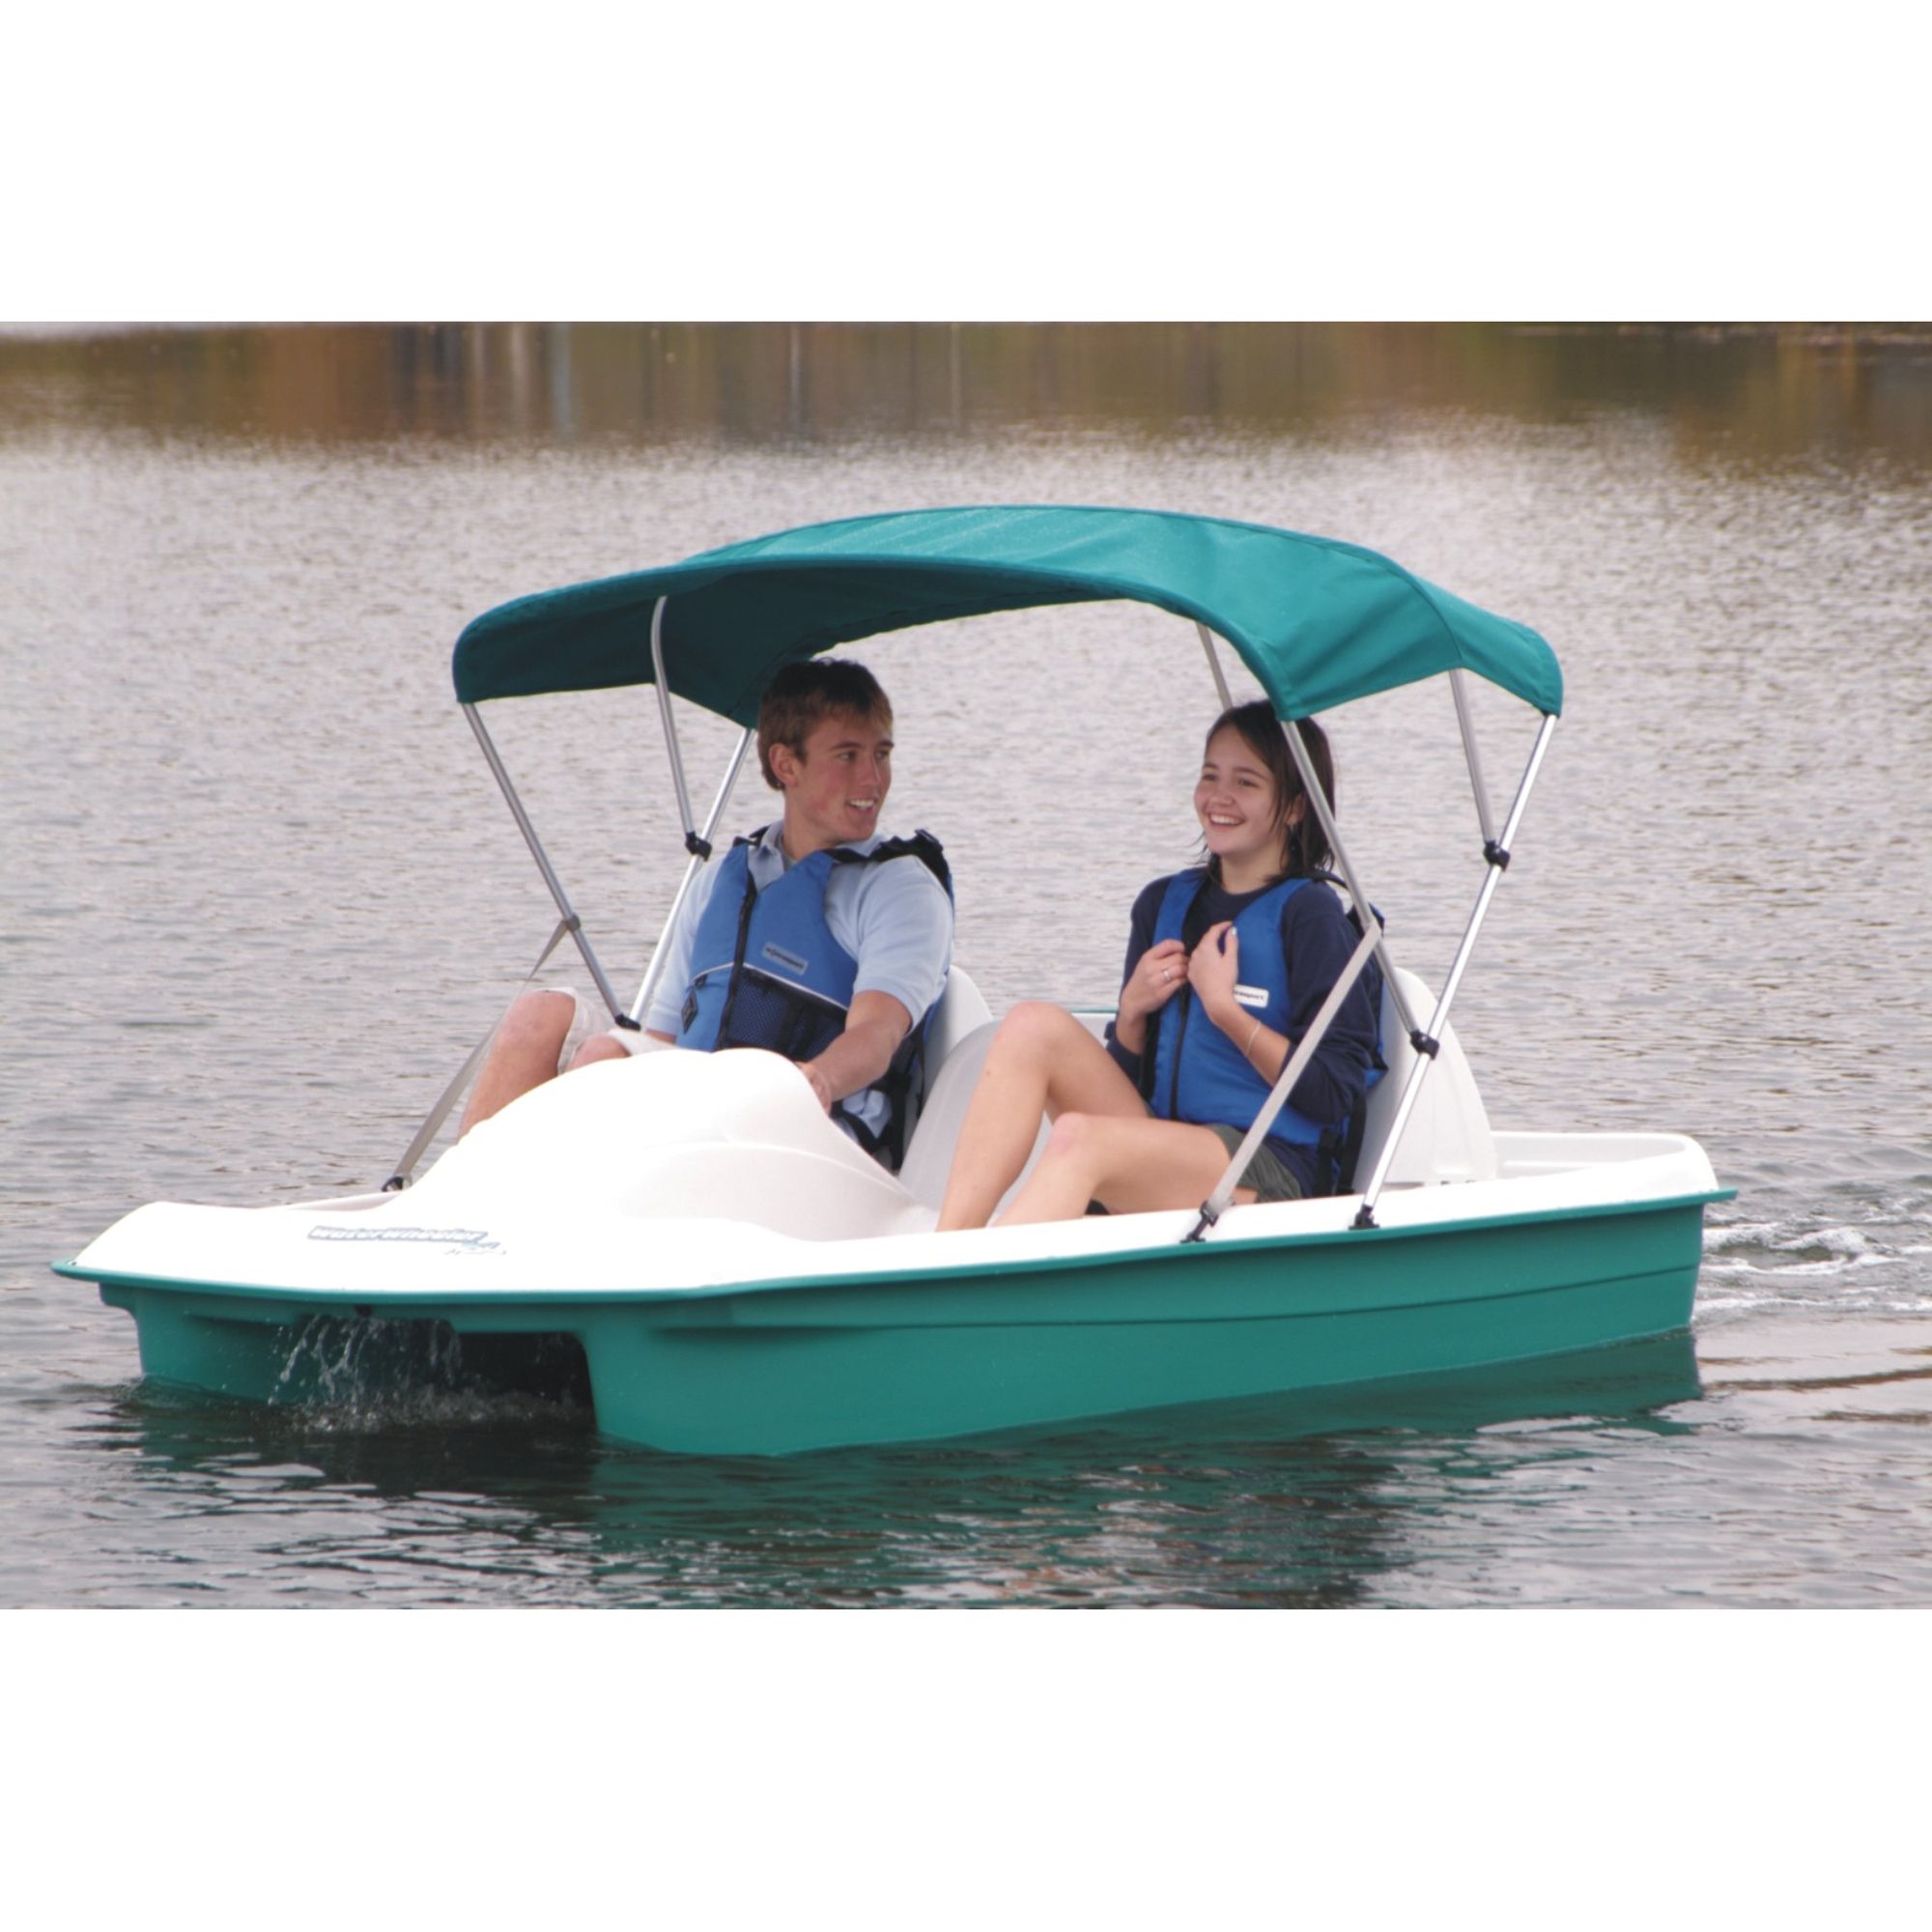 Water Wheeler Pedal Boat With Canopy sale? or Planning to buy KL Industri.....